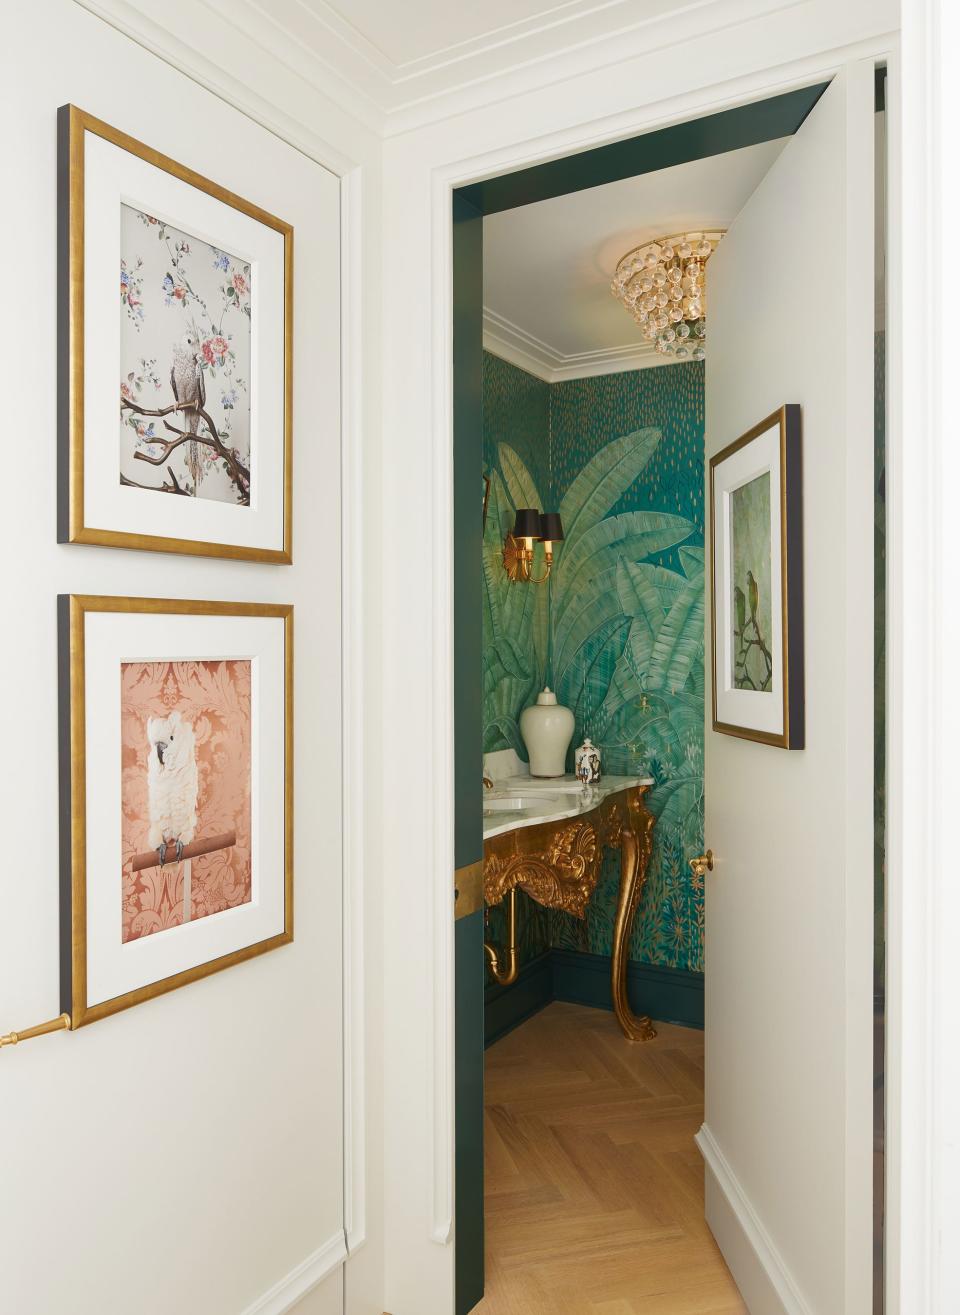 A collection of photographs by Claire Rosen from her “Birds of a Feather” series lines the gallery. In the powder room, the hand-painted wallpaper is by decorative artist Colette Cosentino.